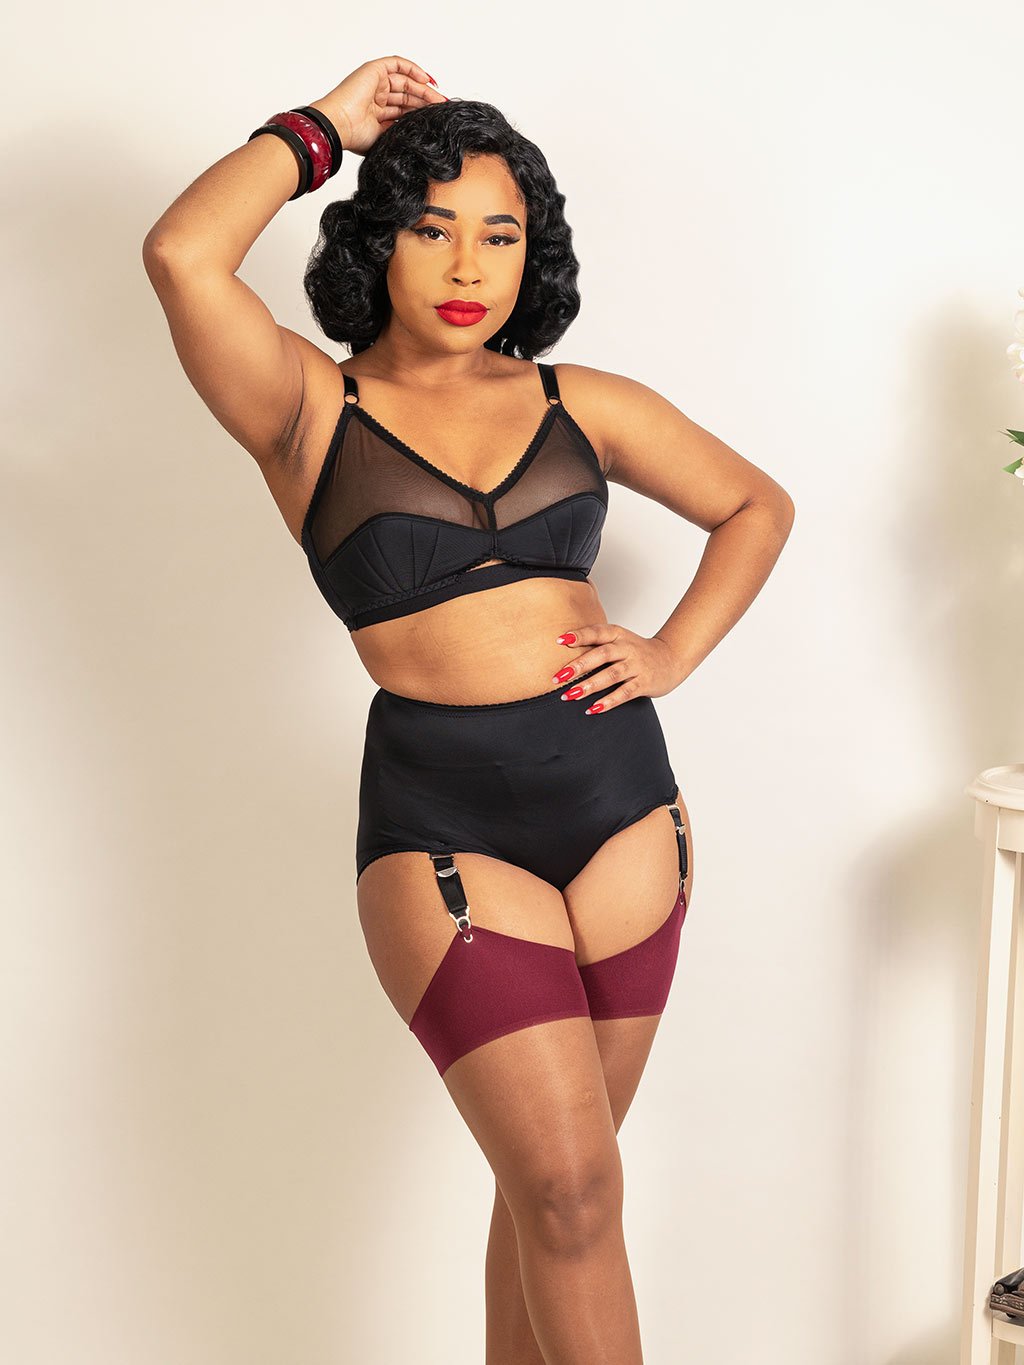 Retro Liz lingerie by What Katie Did. Easy fit bra and suspender knickers in black recycled stretch fabric. Shop vintage inspired lingerie at What Katie Did.